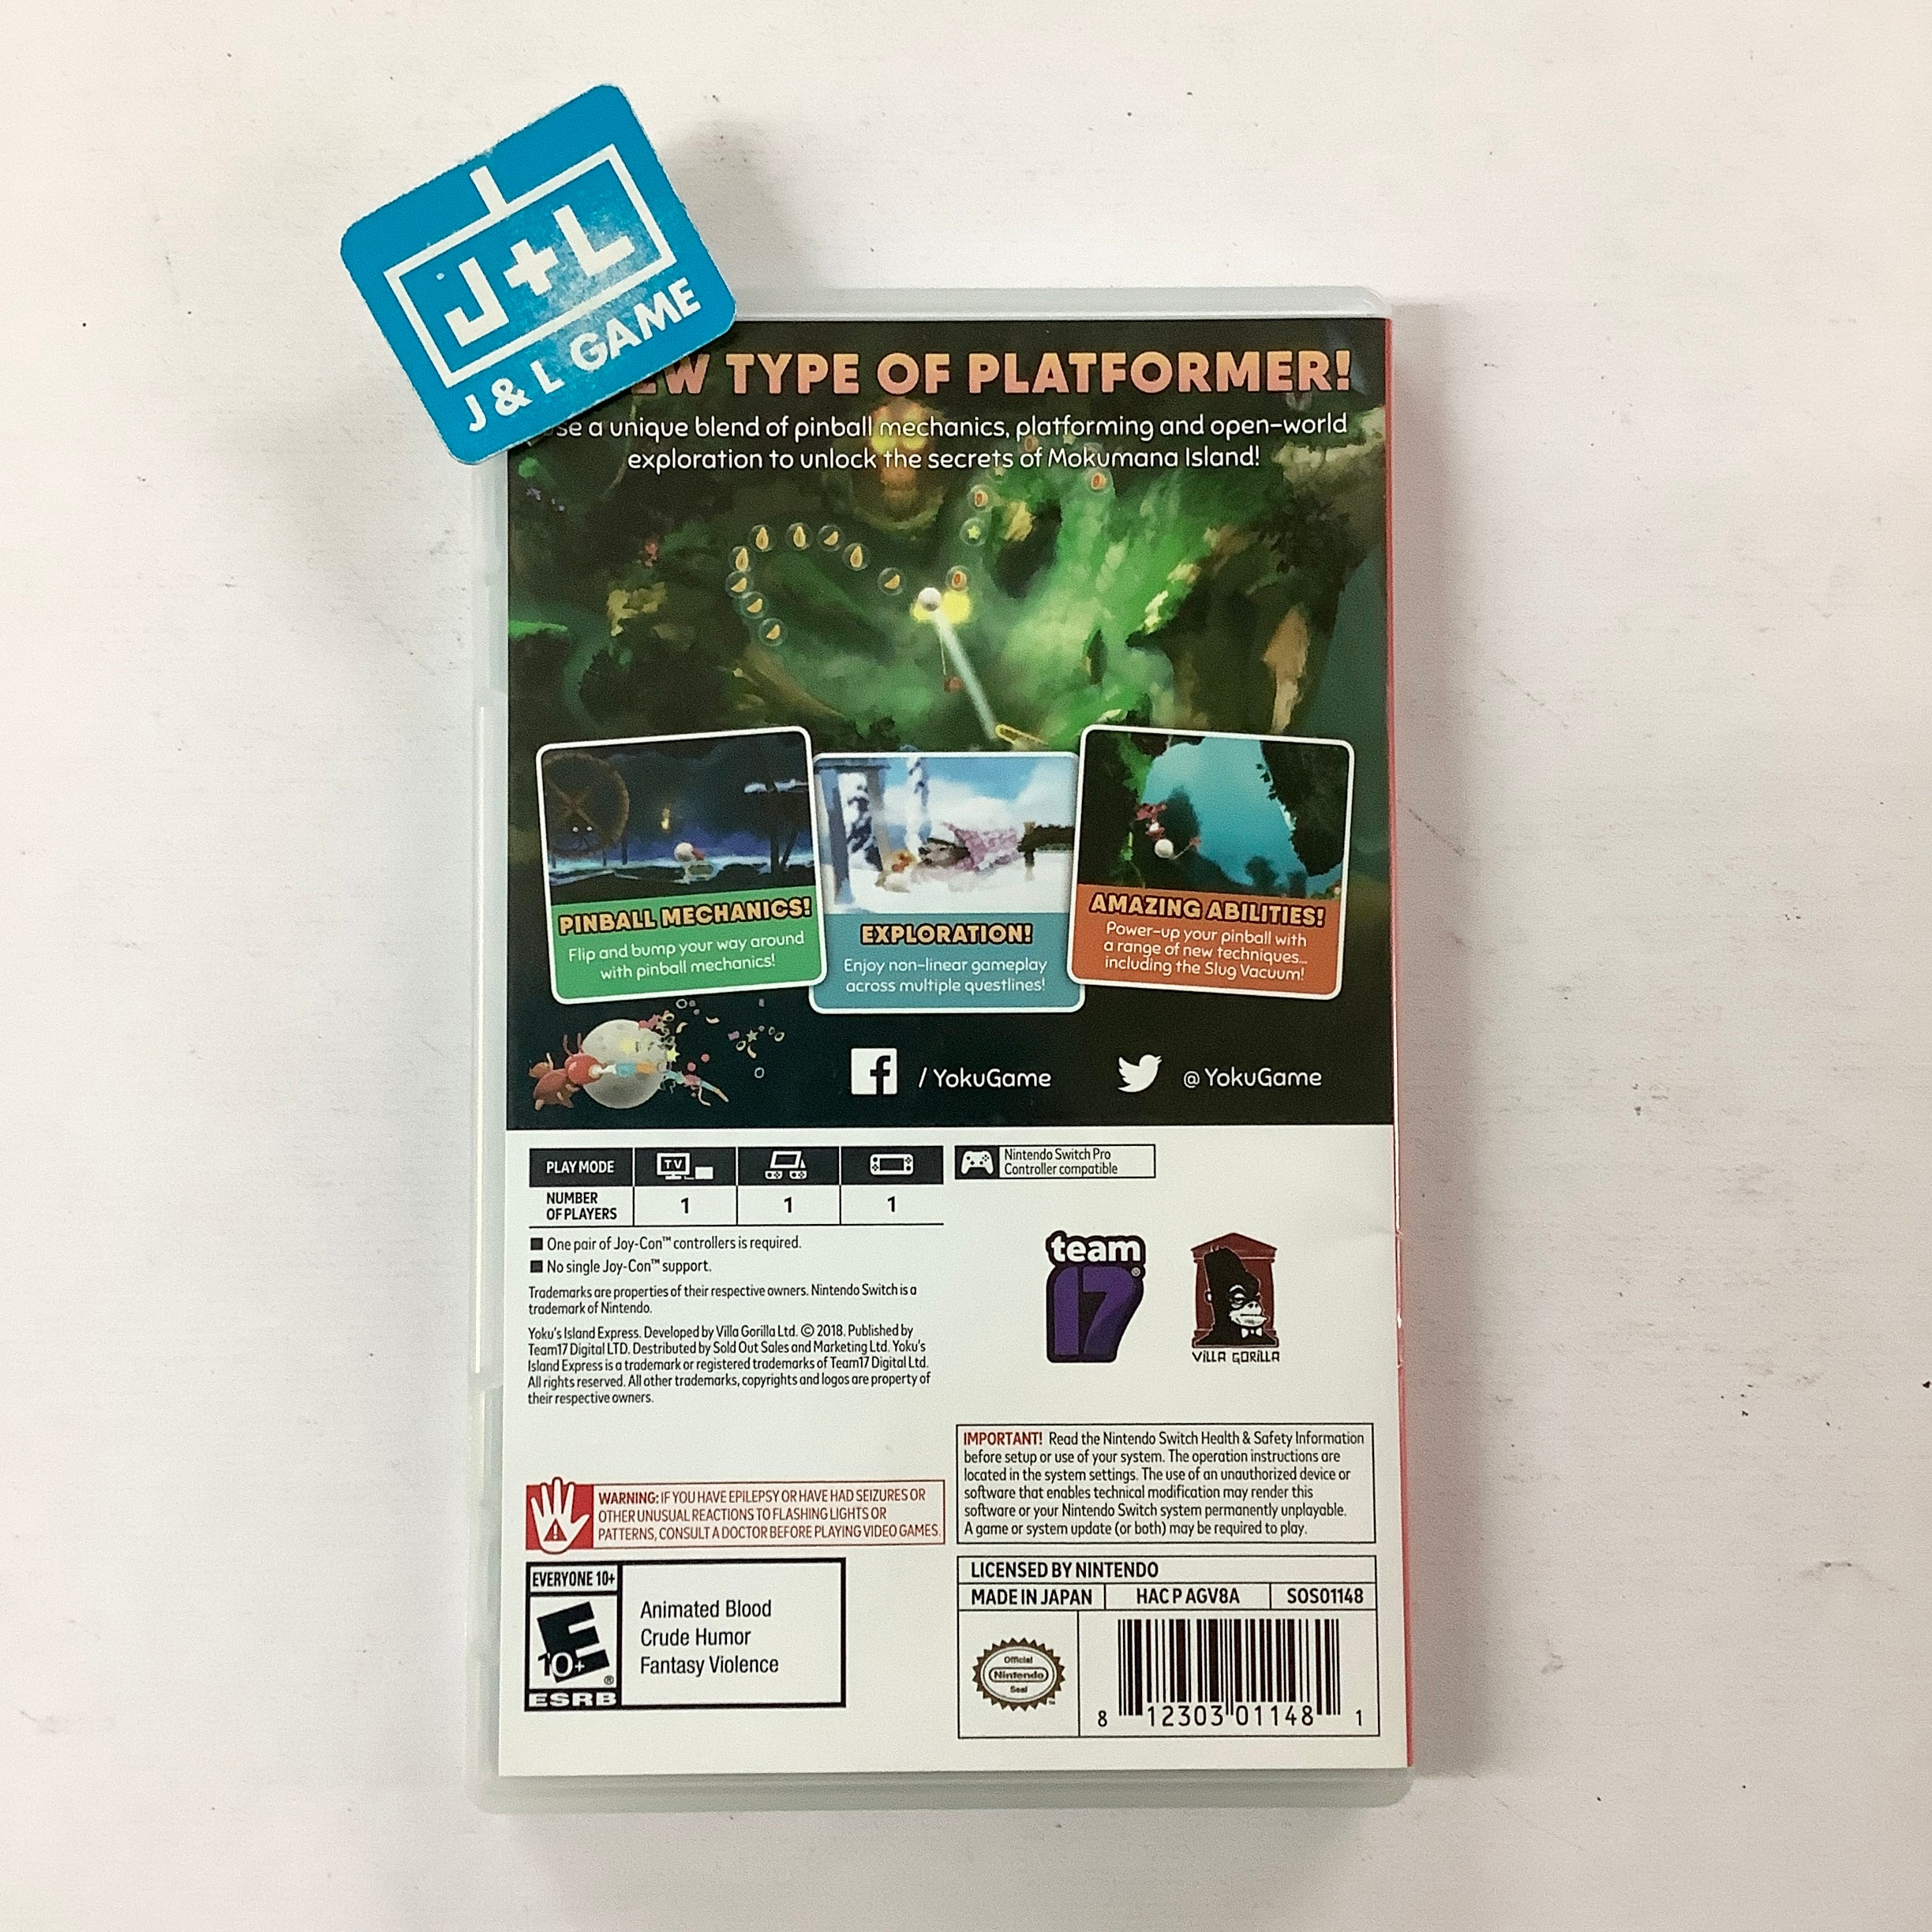 Yoku's Island Express - (NSW) Nintendo Switch [Pre-Owned] Video Games Team 17   